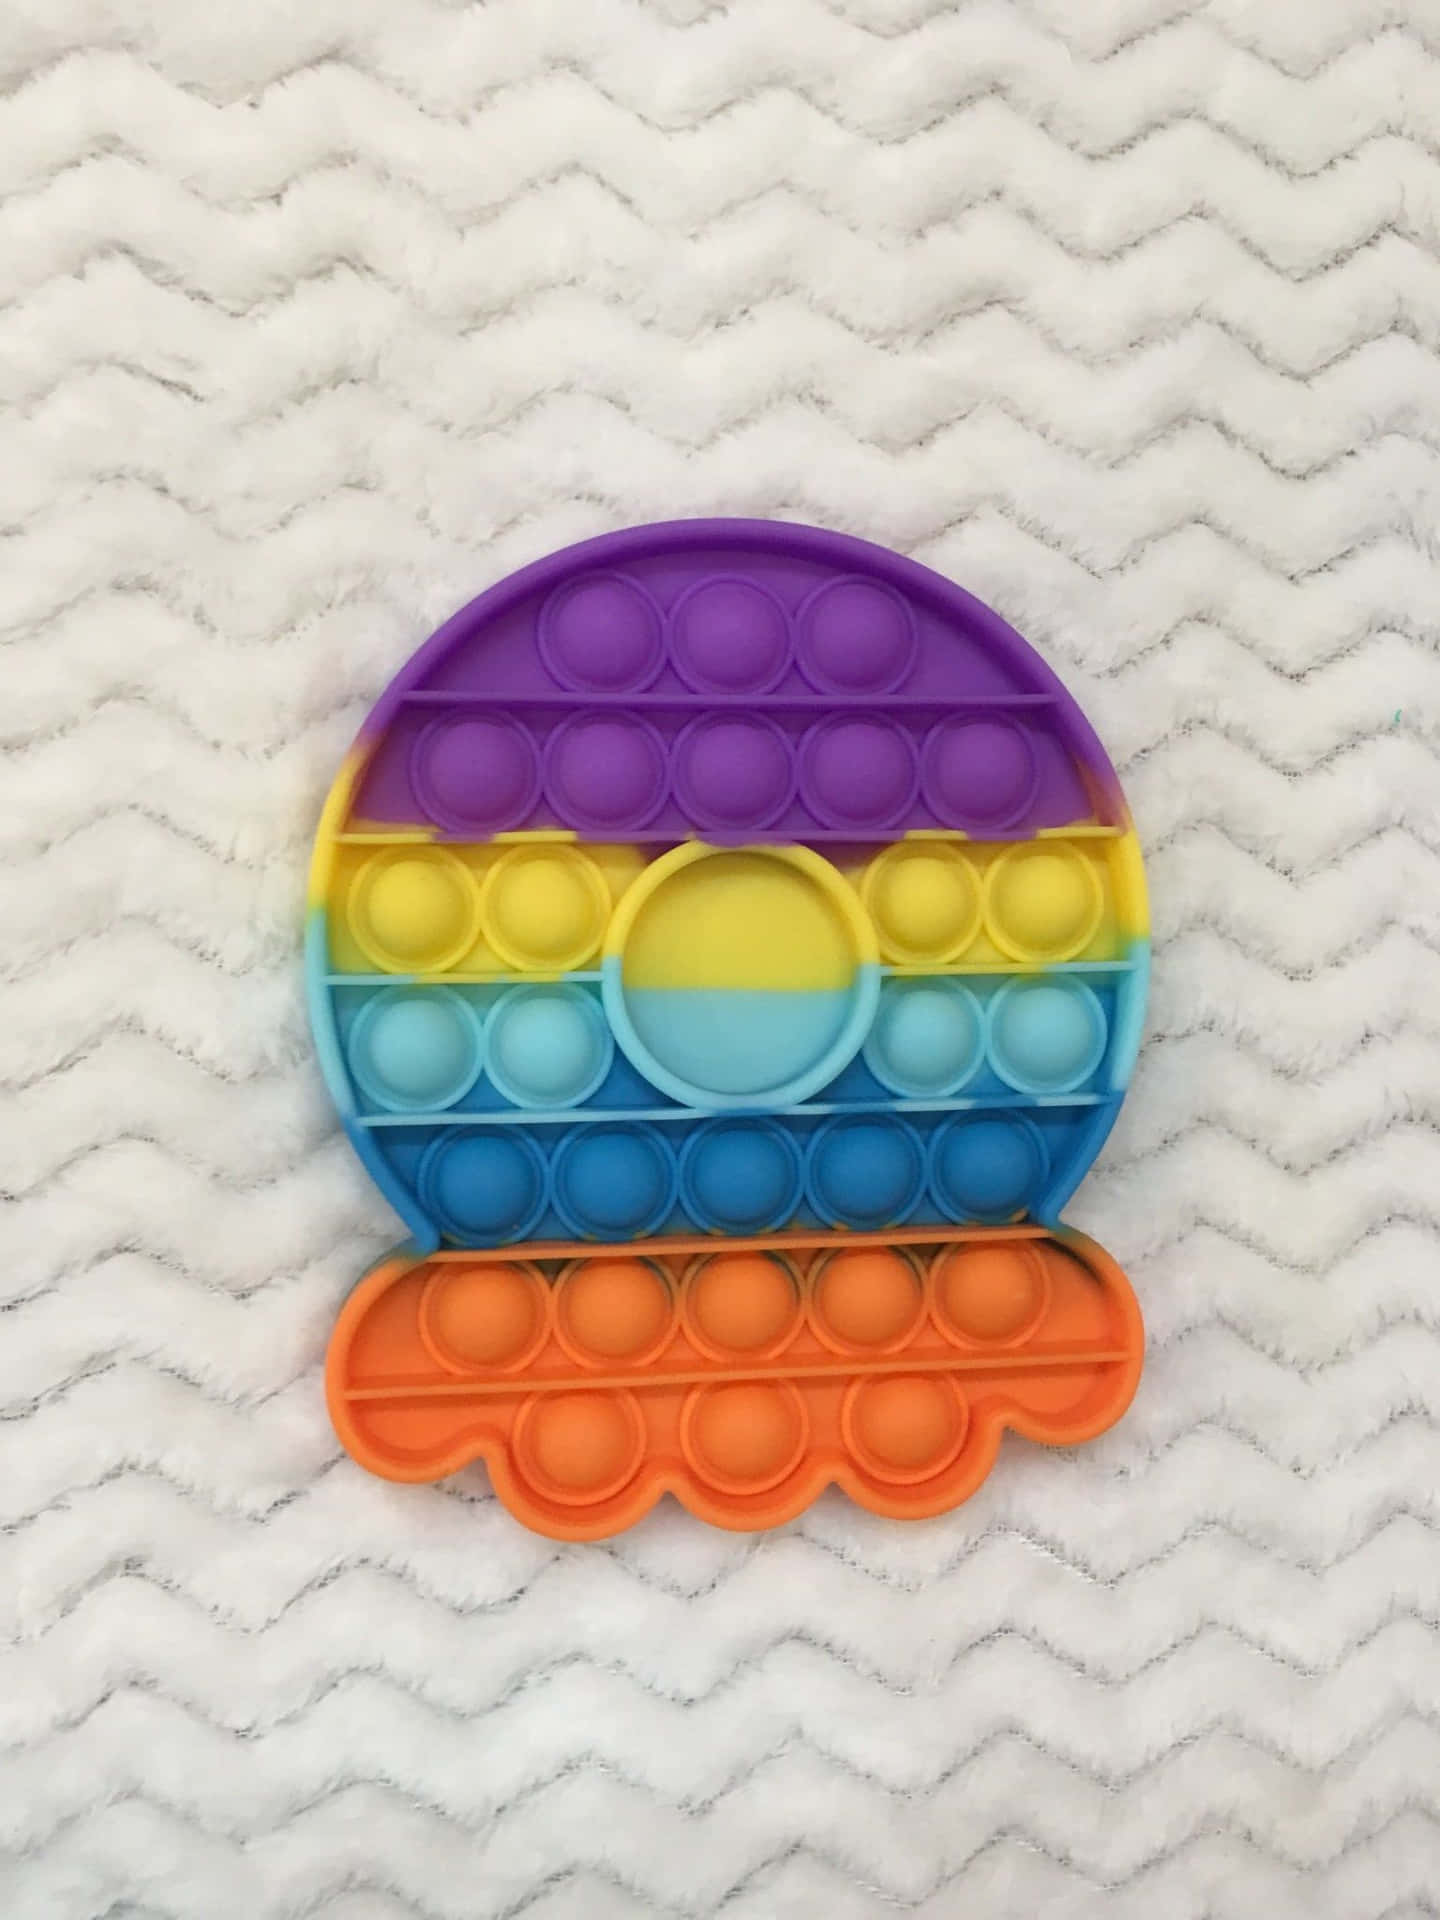 A Colorful Plastic Sphere With A Rainbow Colored Ring